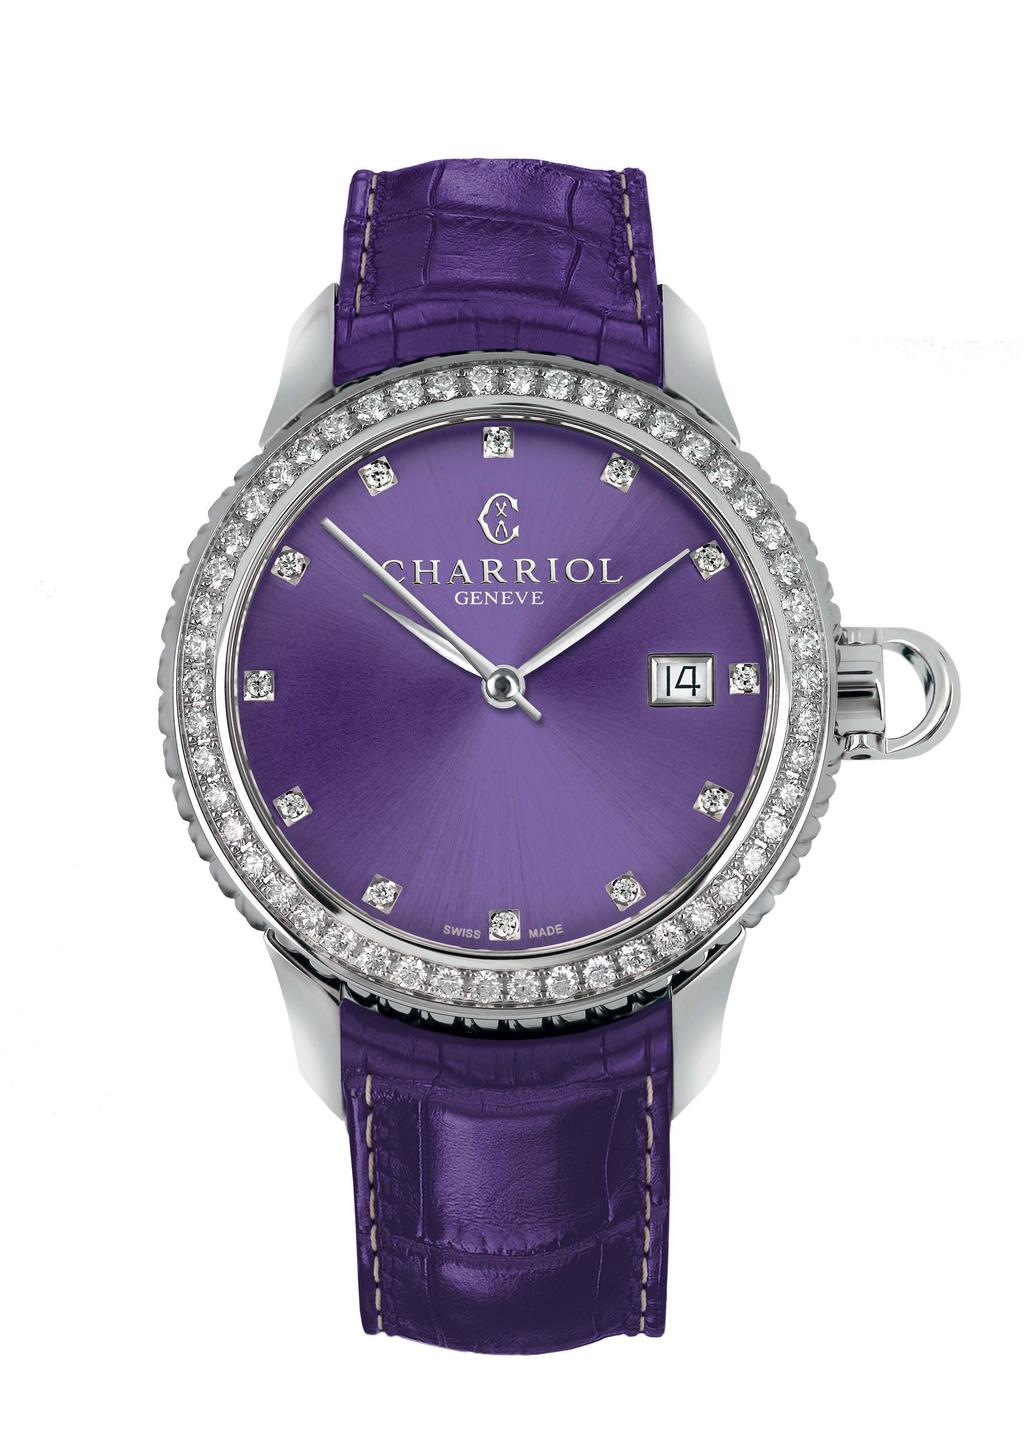 BRIGHT AND EXUBERANT: INTRODUCING COLVMBVS PRUNE CHARRIOL s COLVMBVS collection welcomes a new quartz timepiece for women: an exuberant, all-plum edition.